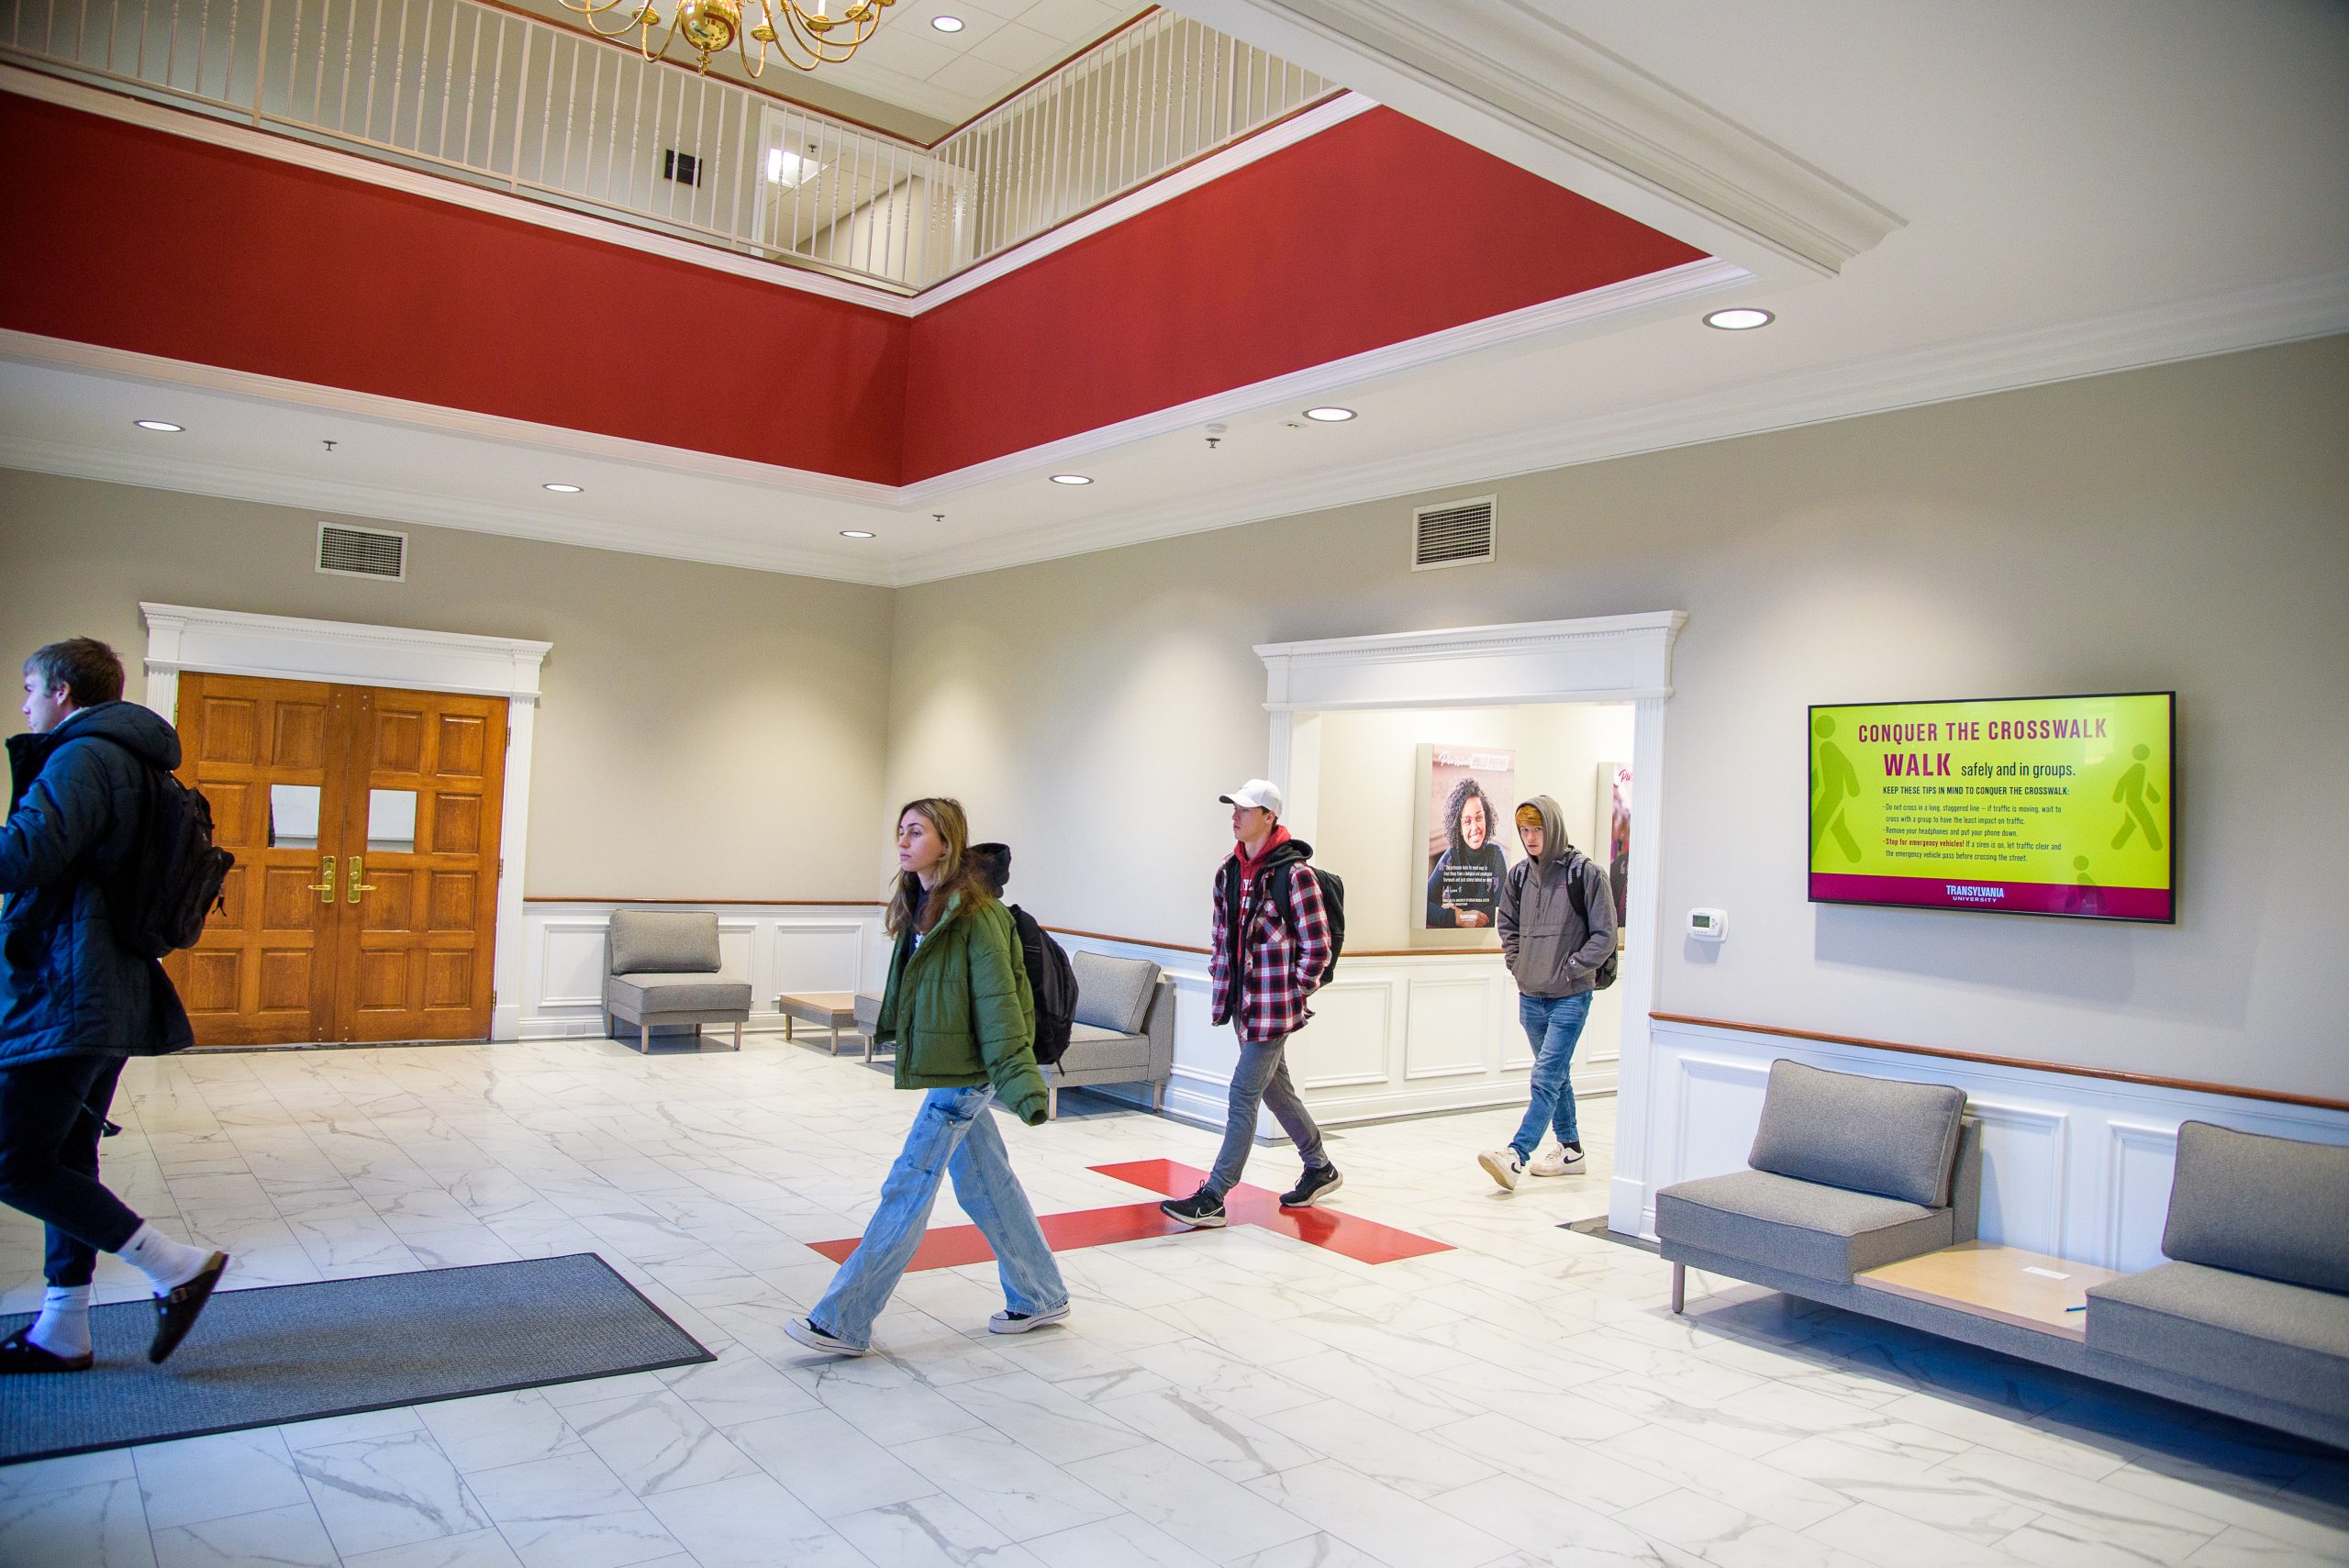 Students walking through the renovated lobby of the Cowgill Center